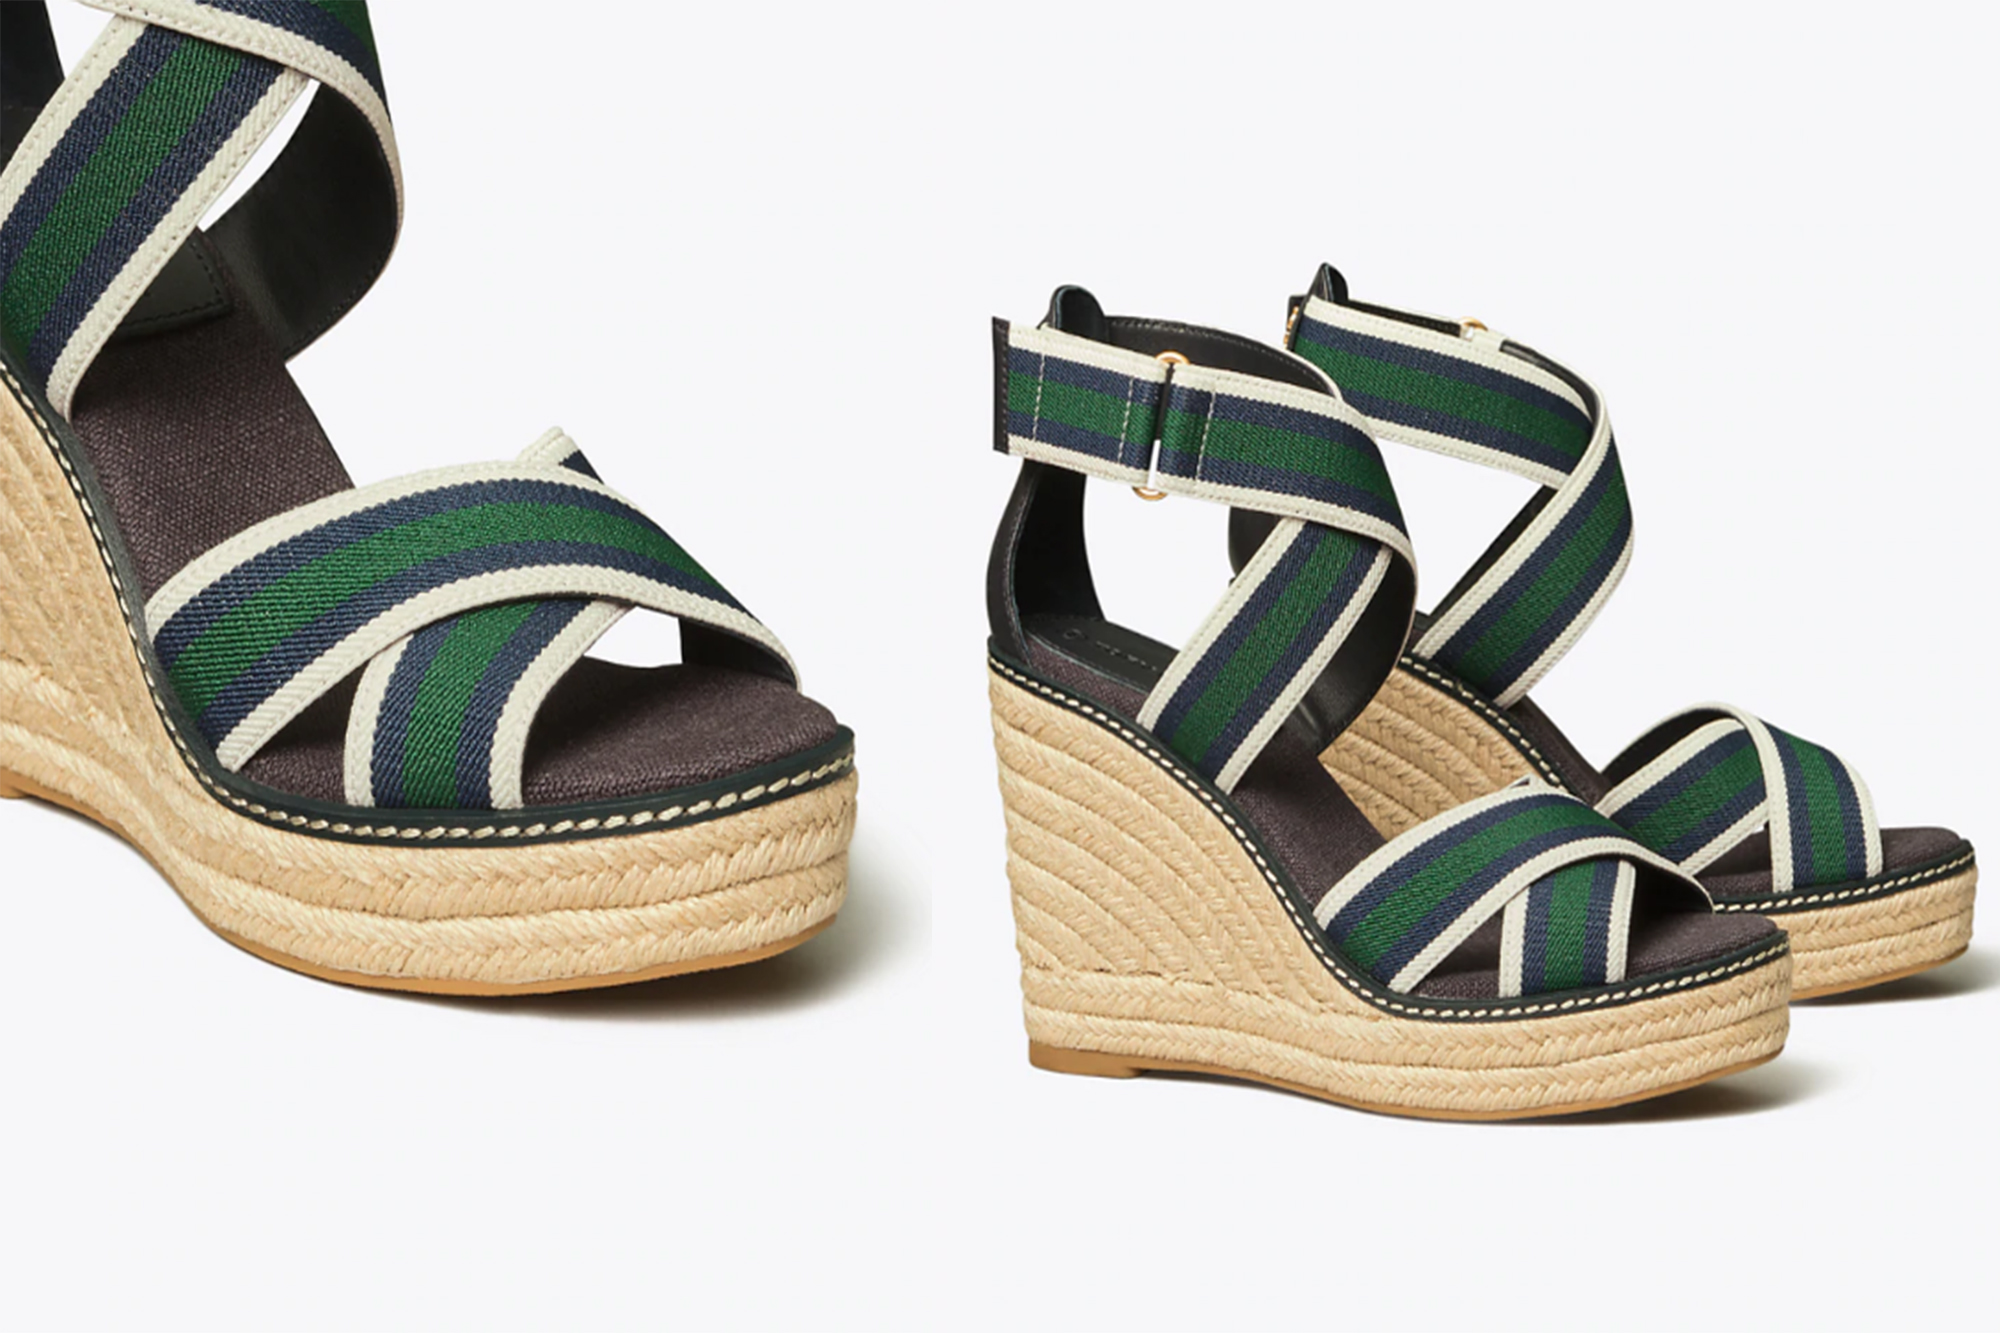 Tory Burch Espadrille Sandals Are Insanely Comfy — Over $80 Off!